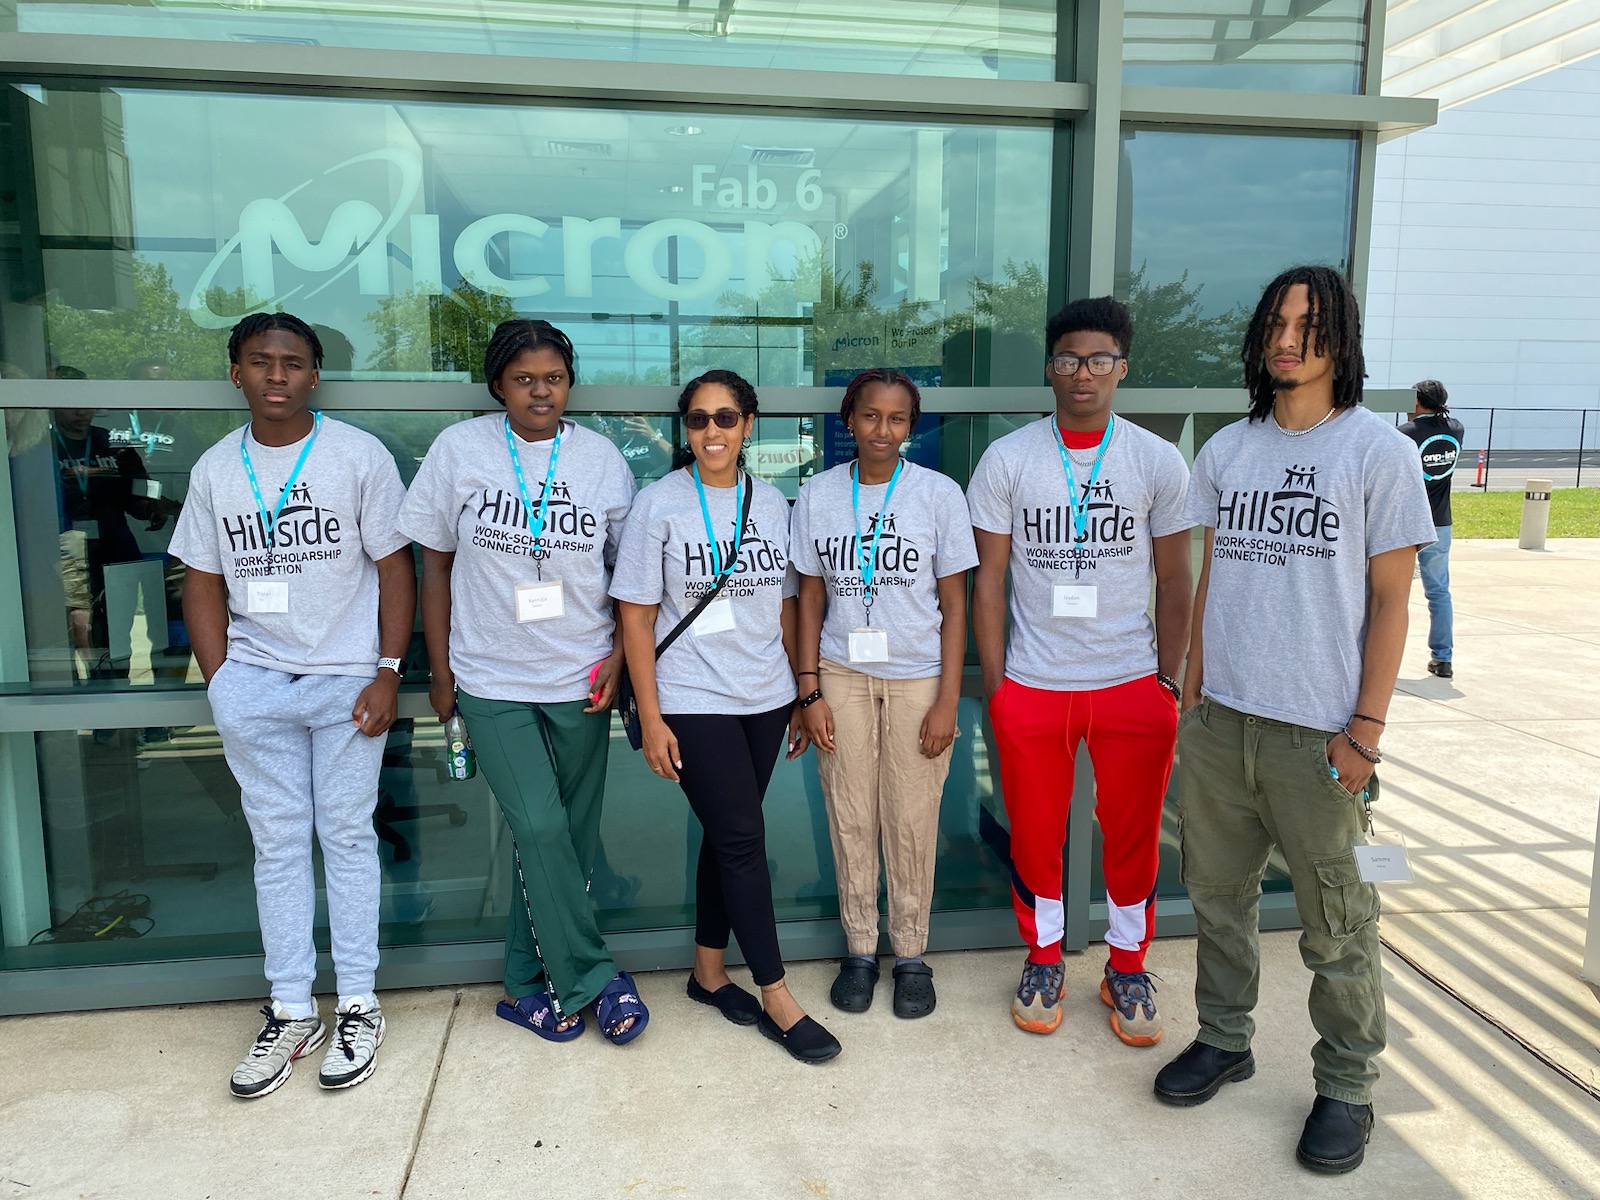 This is a photo of SCSD students who  attended a trip to Micron - standing in front of the Micron building in Virginia.